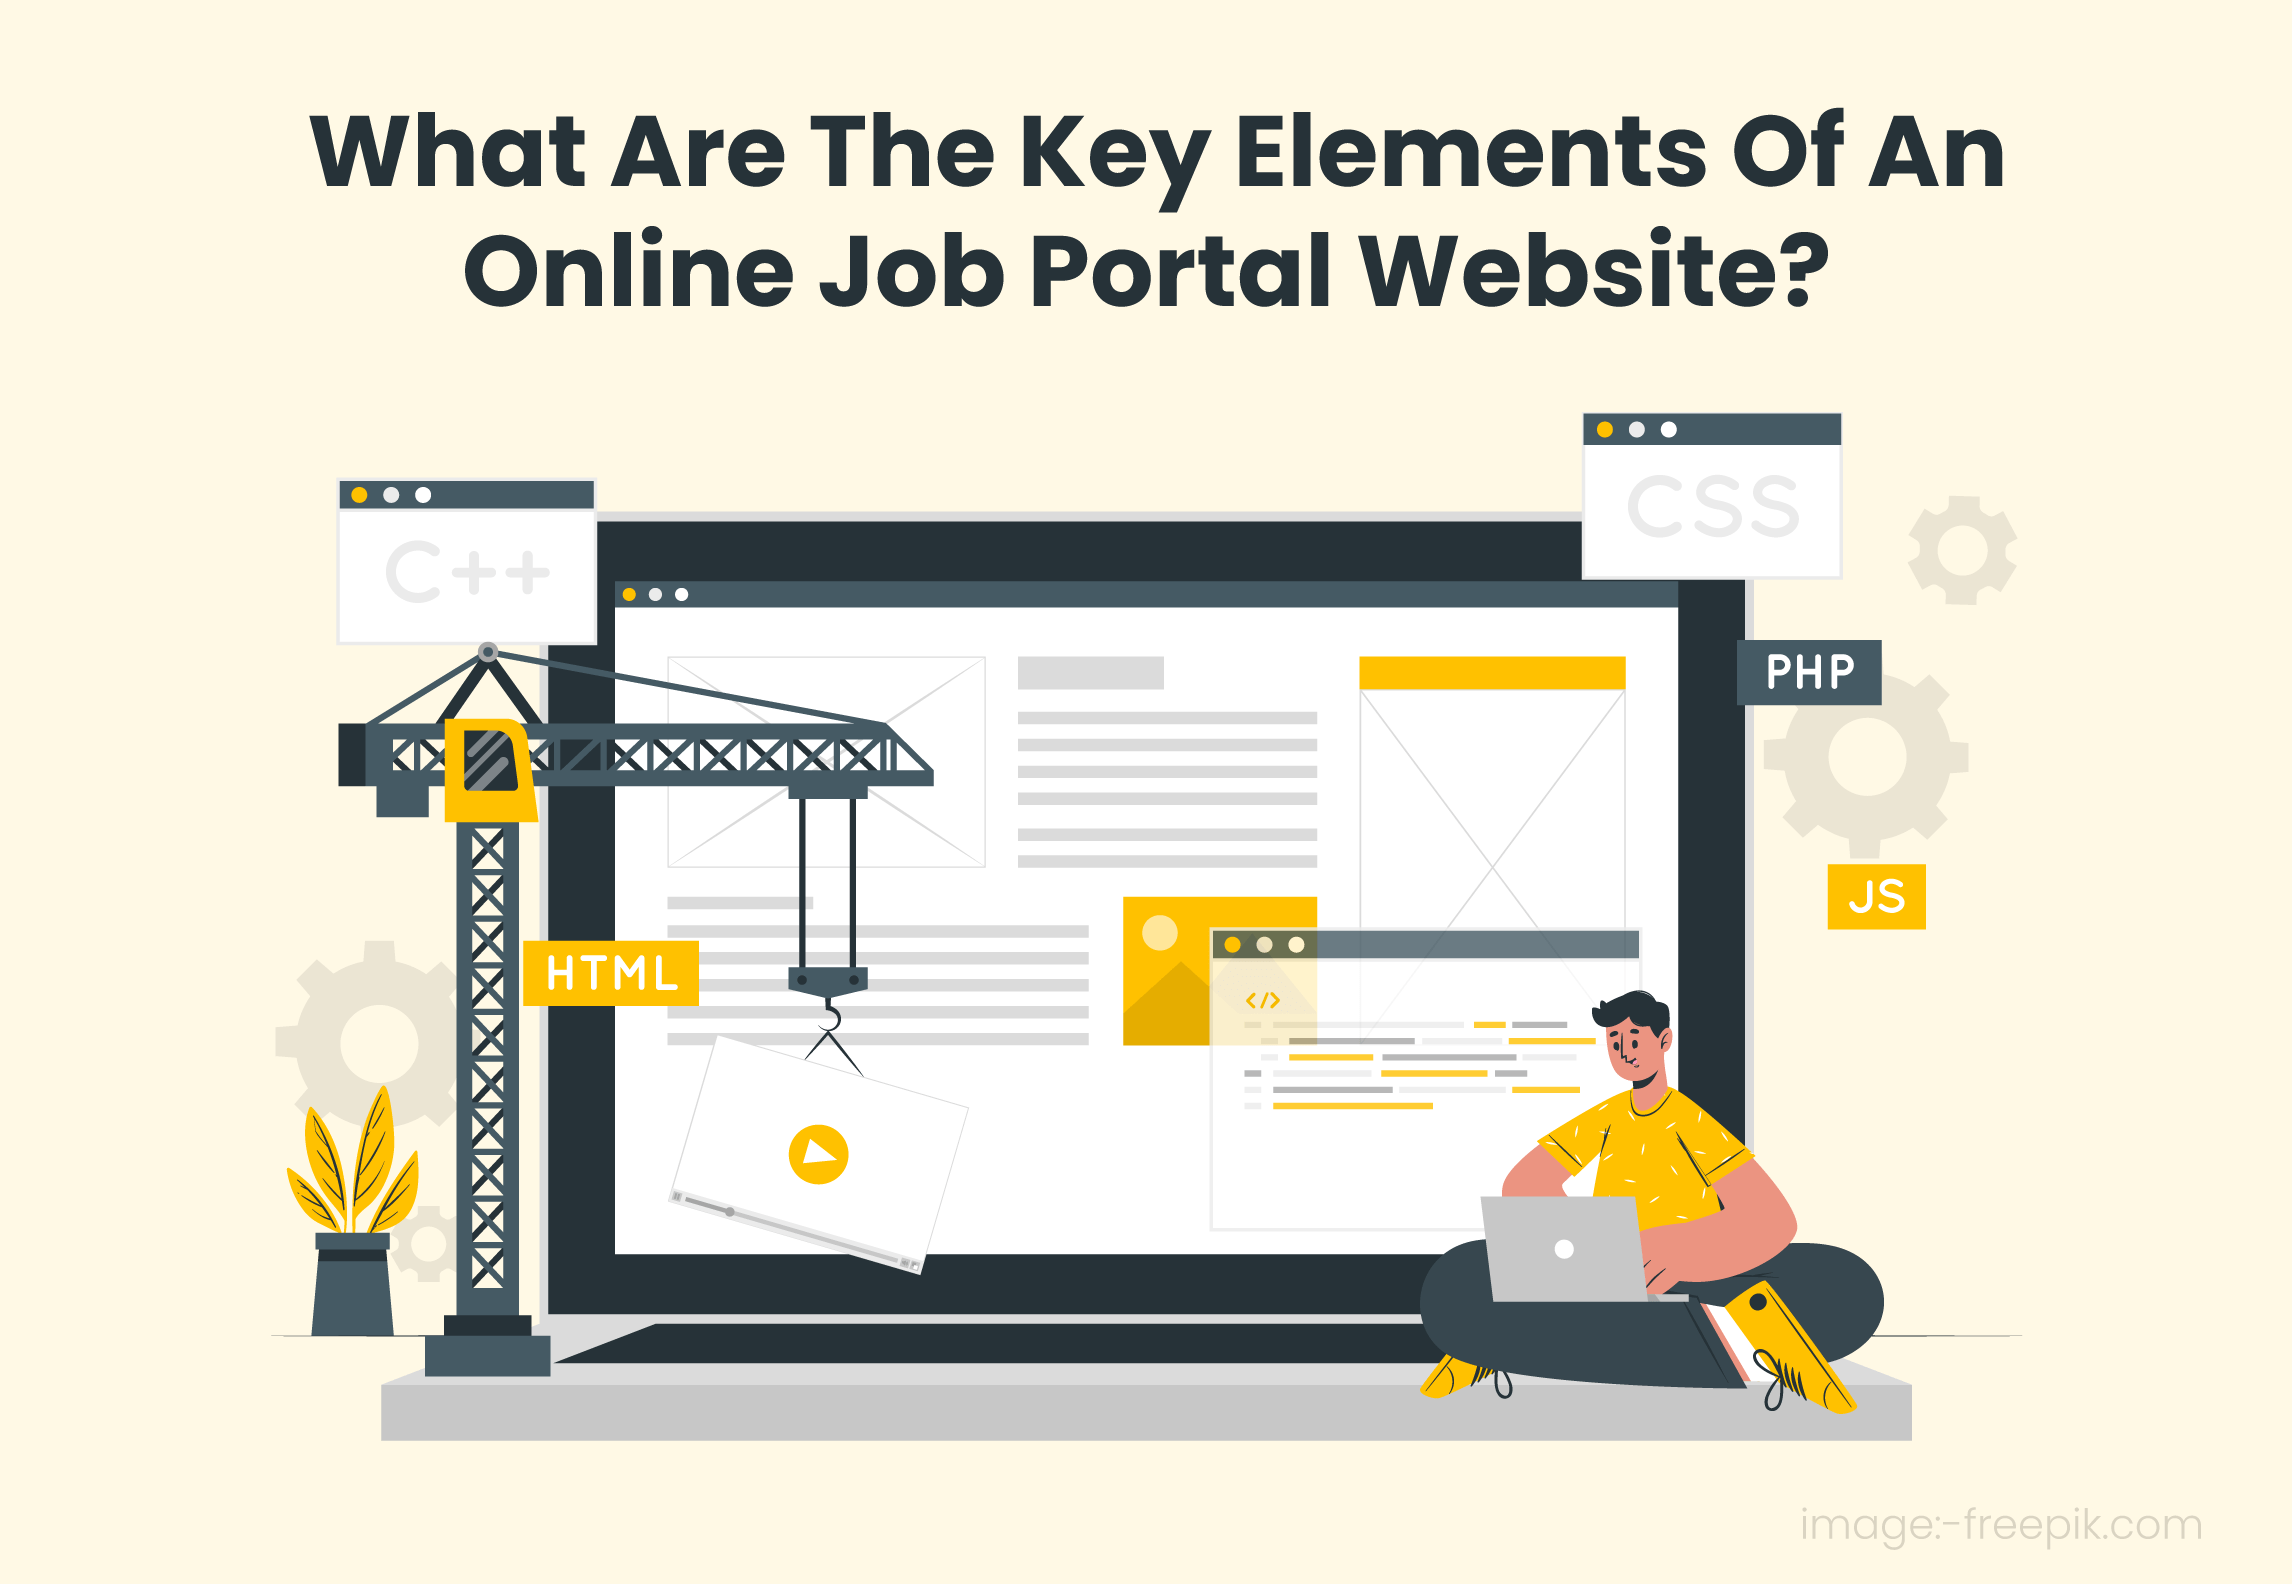 Most Important Features To Included In An Online Job Portal